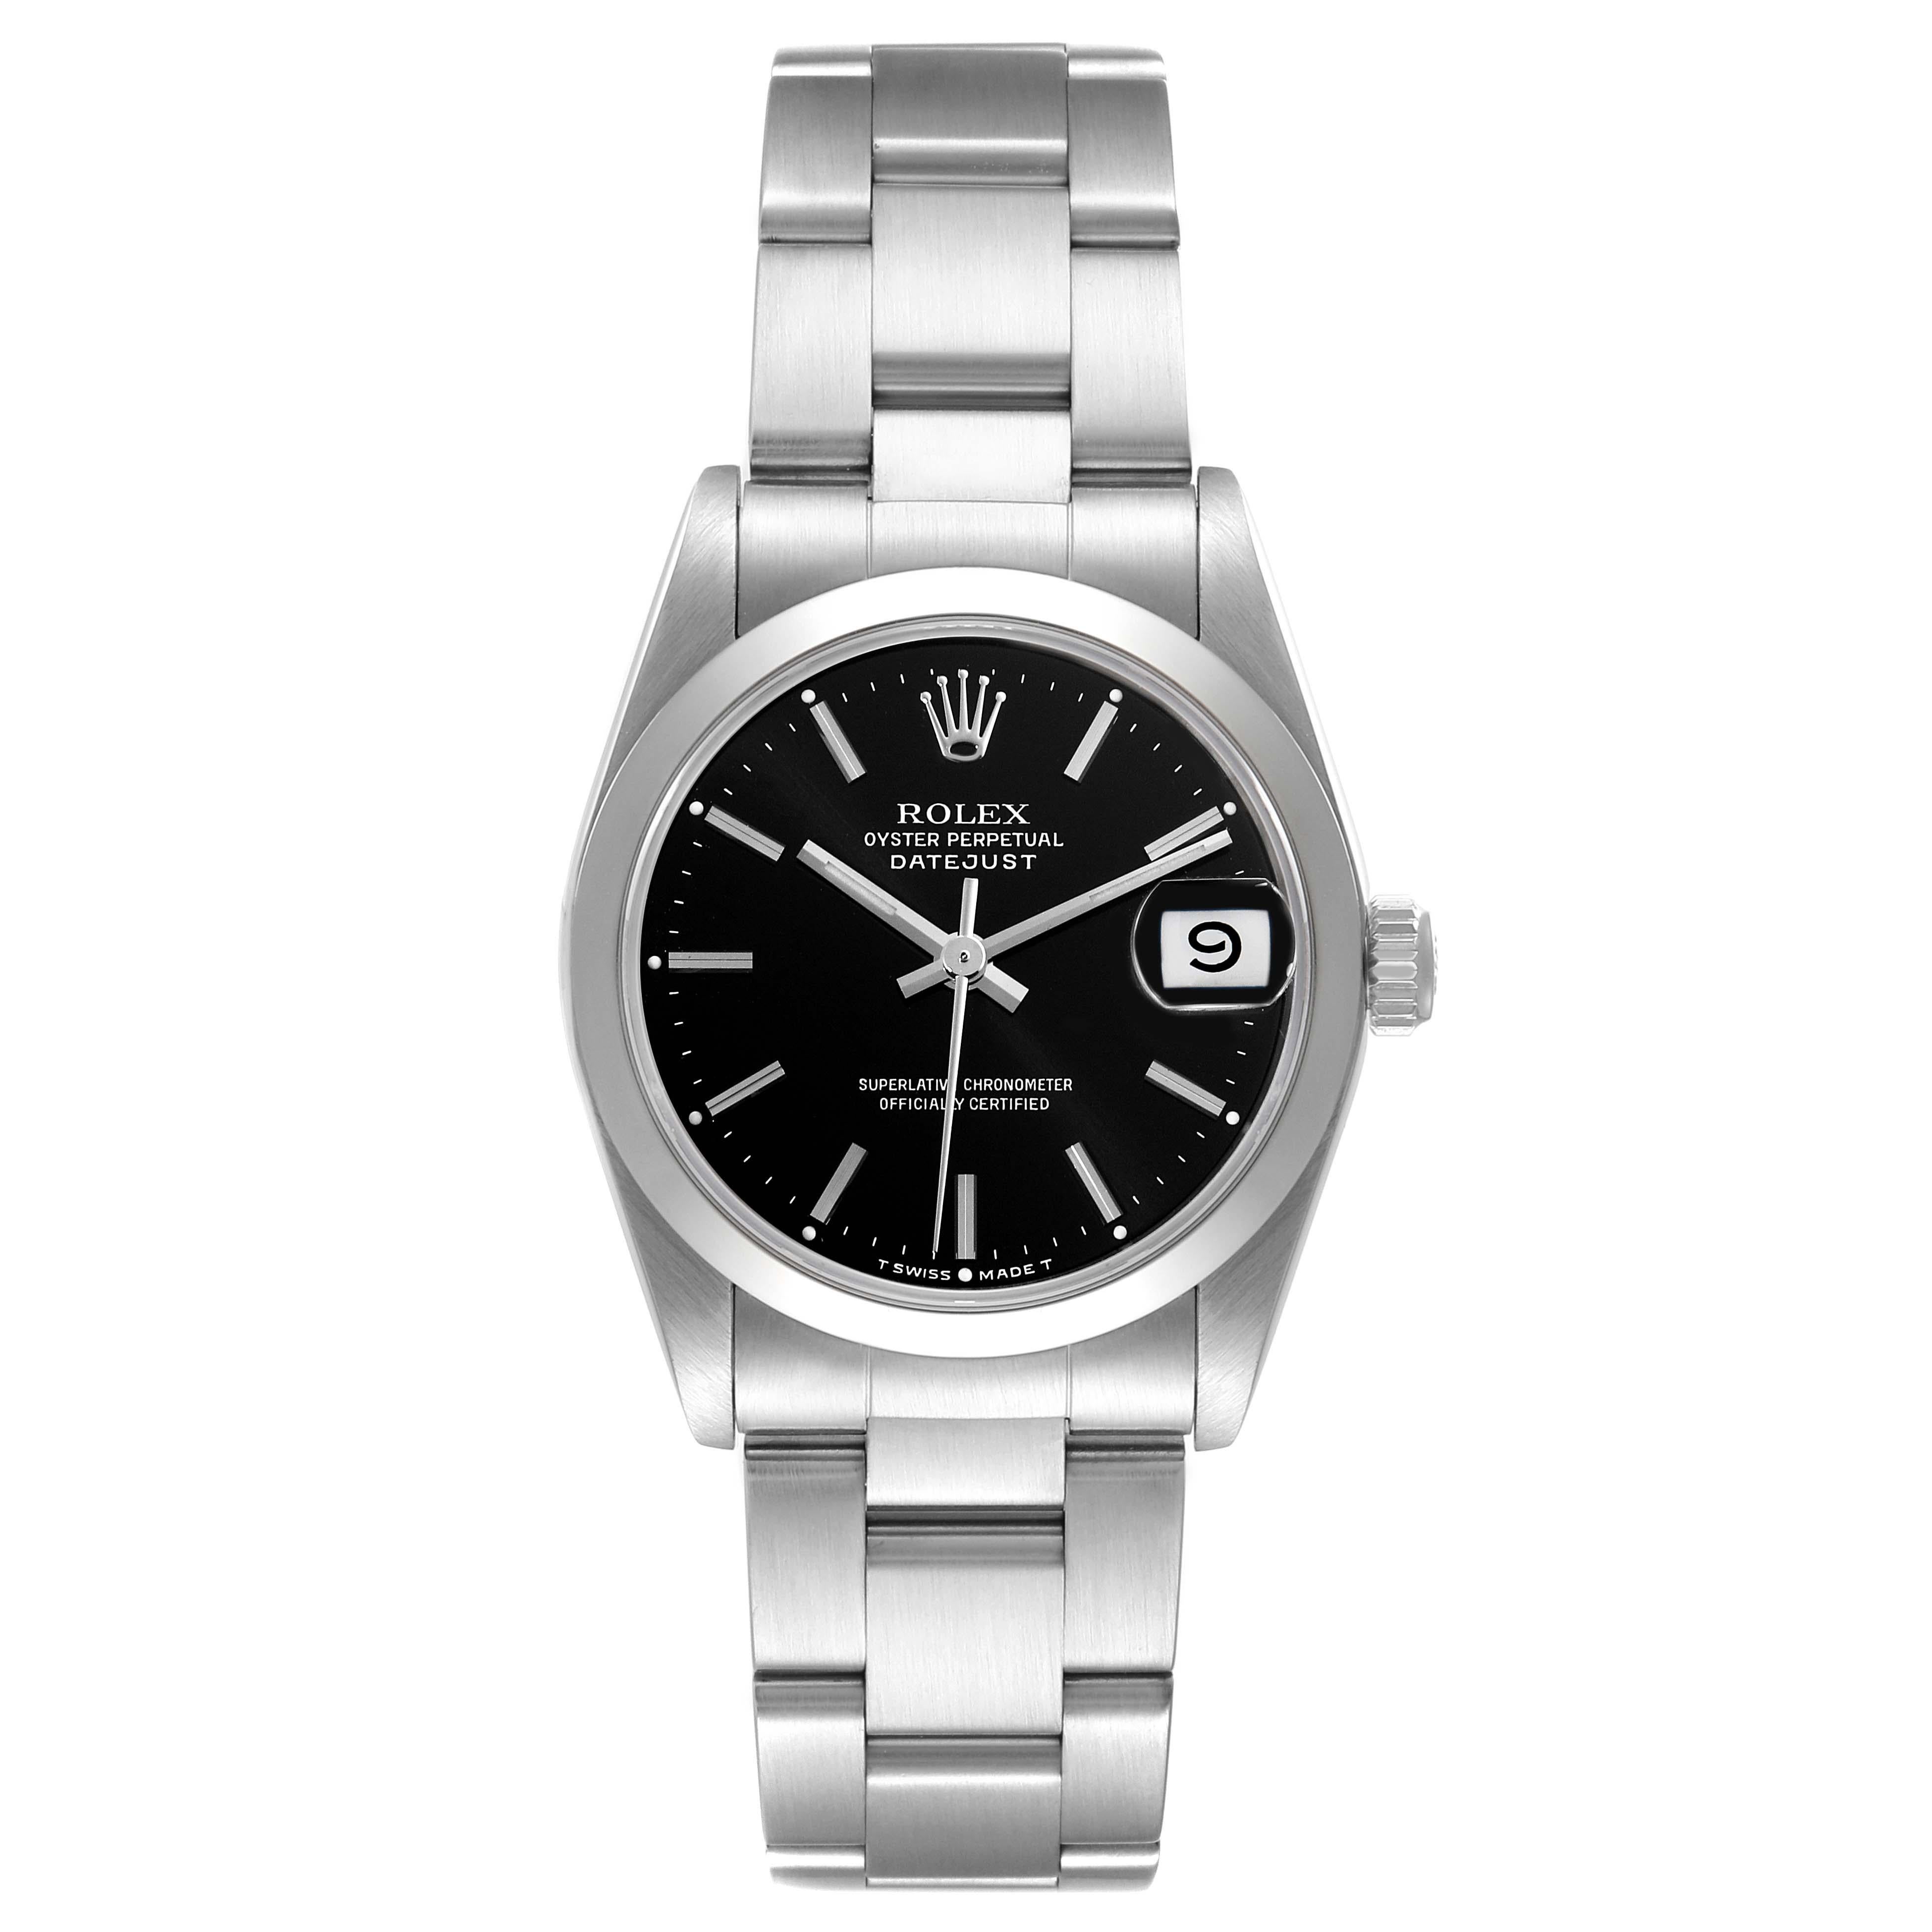 Rolex Midsize Datejust 31 Black Dial Domed Bezel Ladies Steel Watch 68240. Officially certified chronometer automatic self-winding movement with quickset date function. Stainless steel oyster case 31 mm in diameter. Rolex logo on the crown.